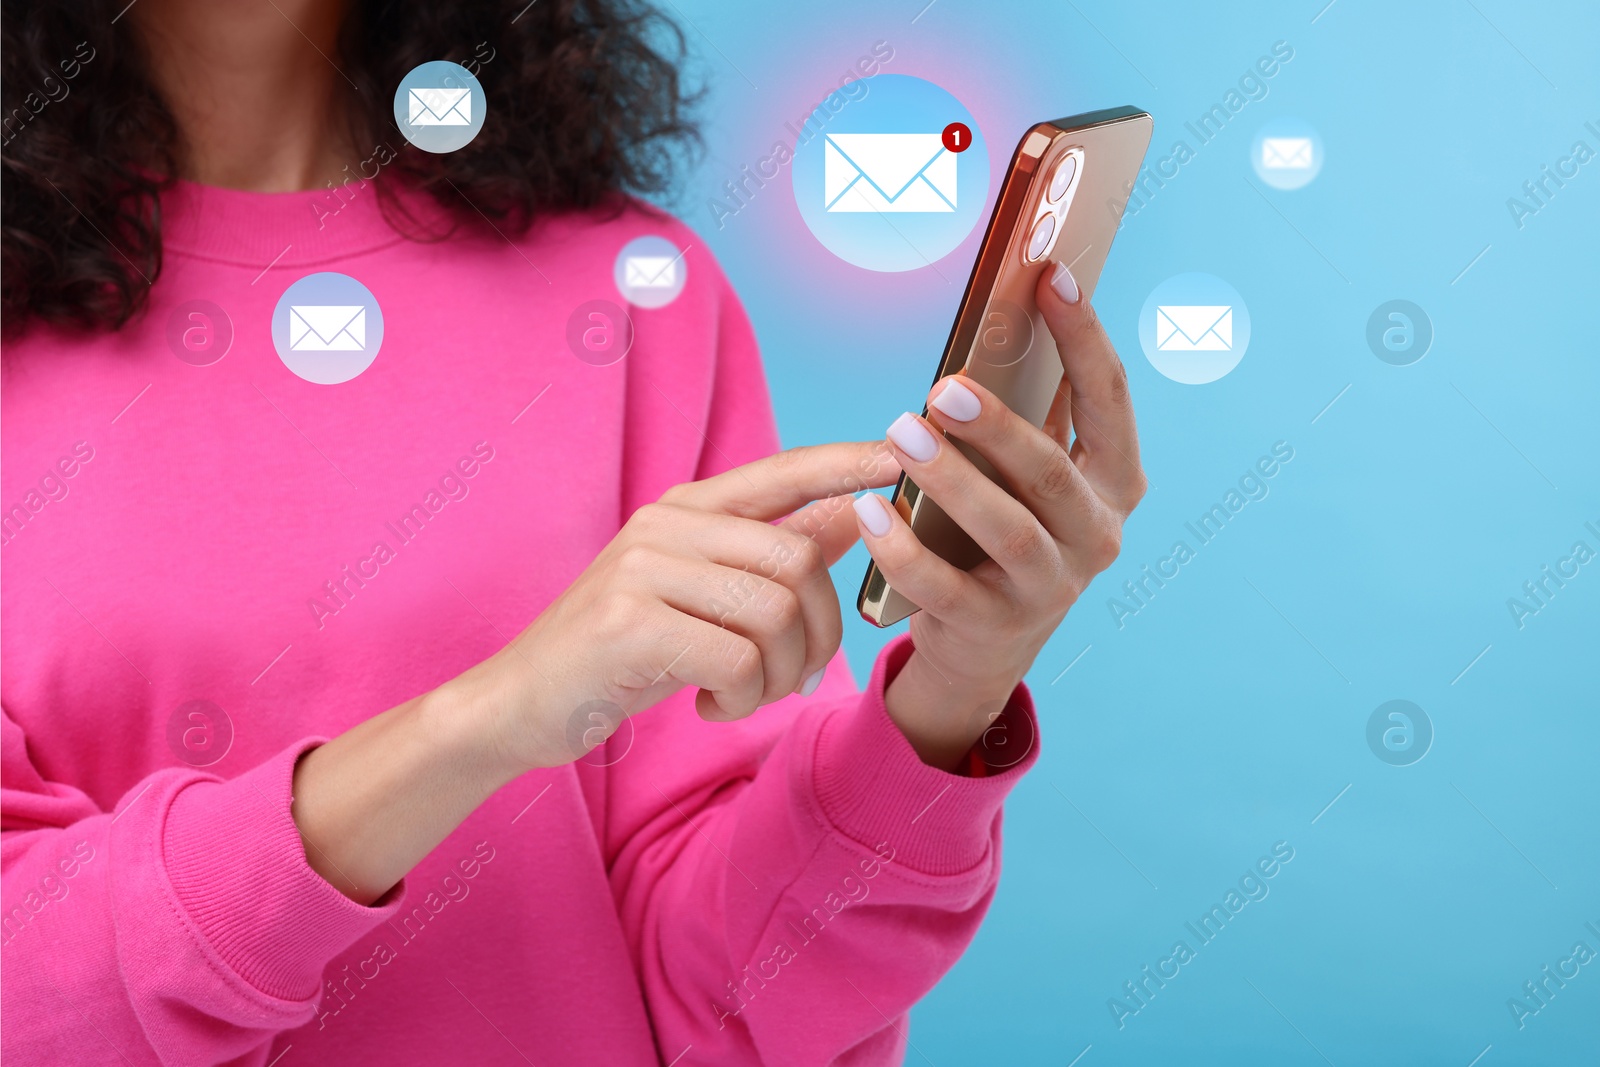 Image of Email. Woman using mobile phone on light blue background, closeup. Letter illustrations around device